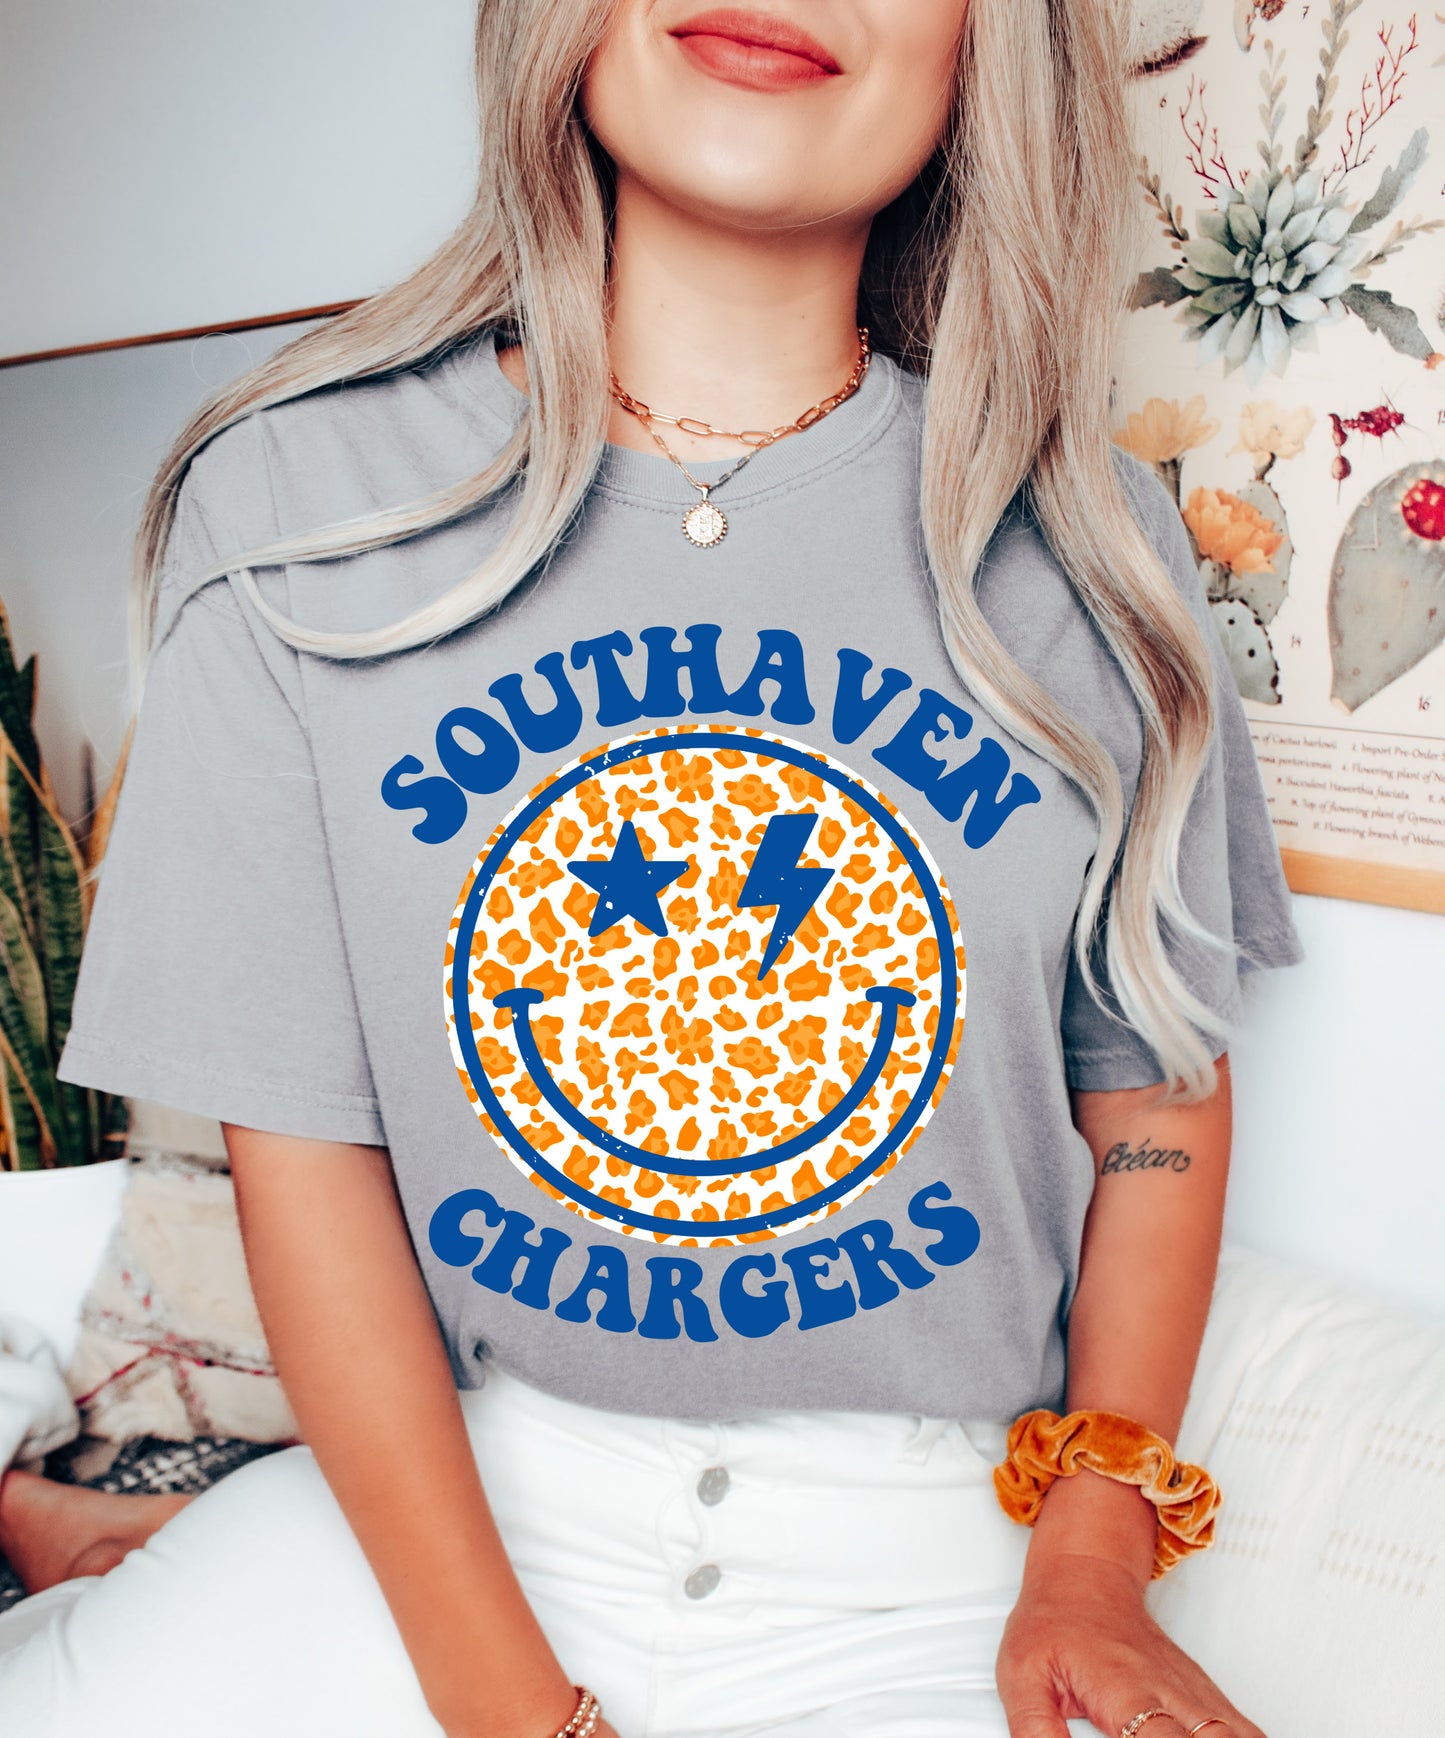 Southaven Chargers Distressed Smiley Unisex Shirt / Toddler, Youth, and Adult Sizes